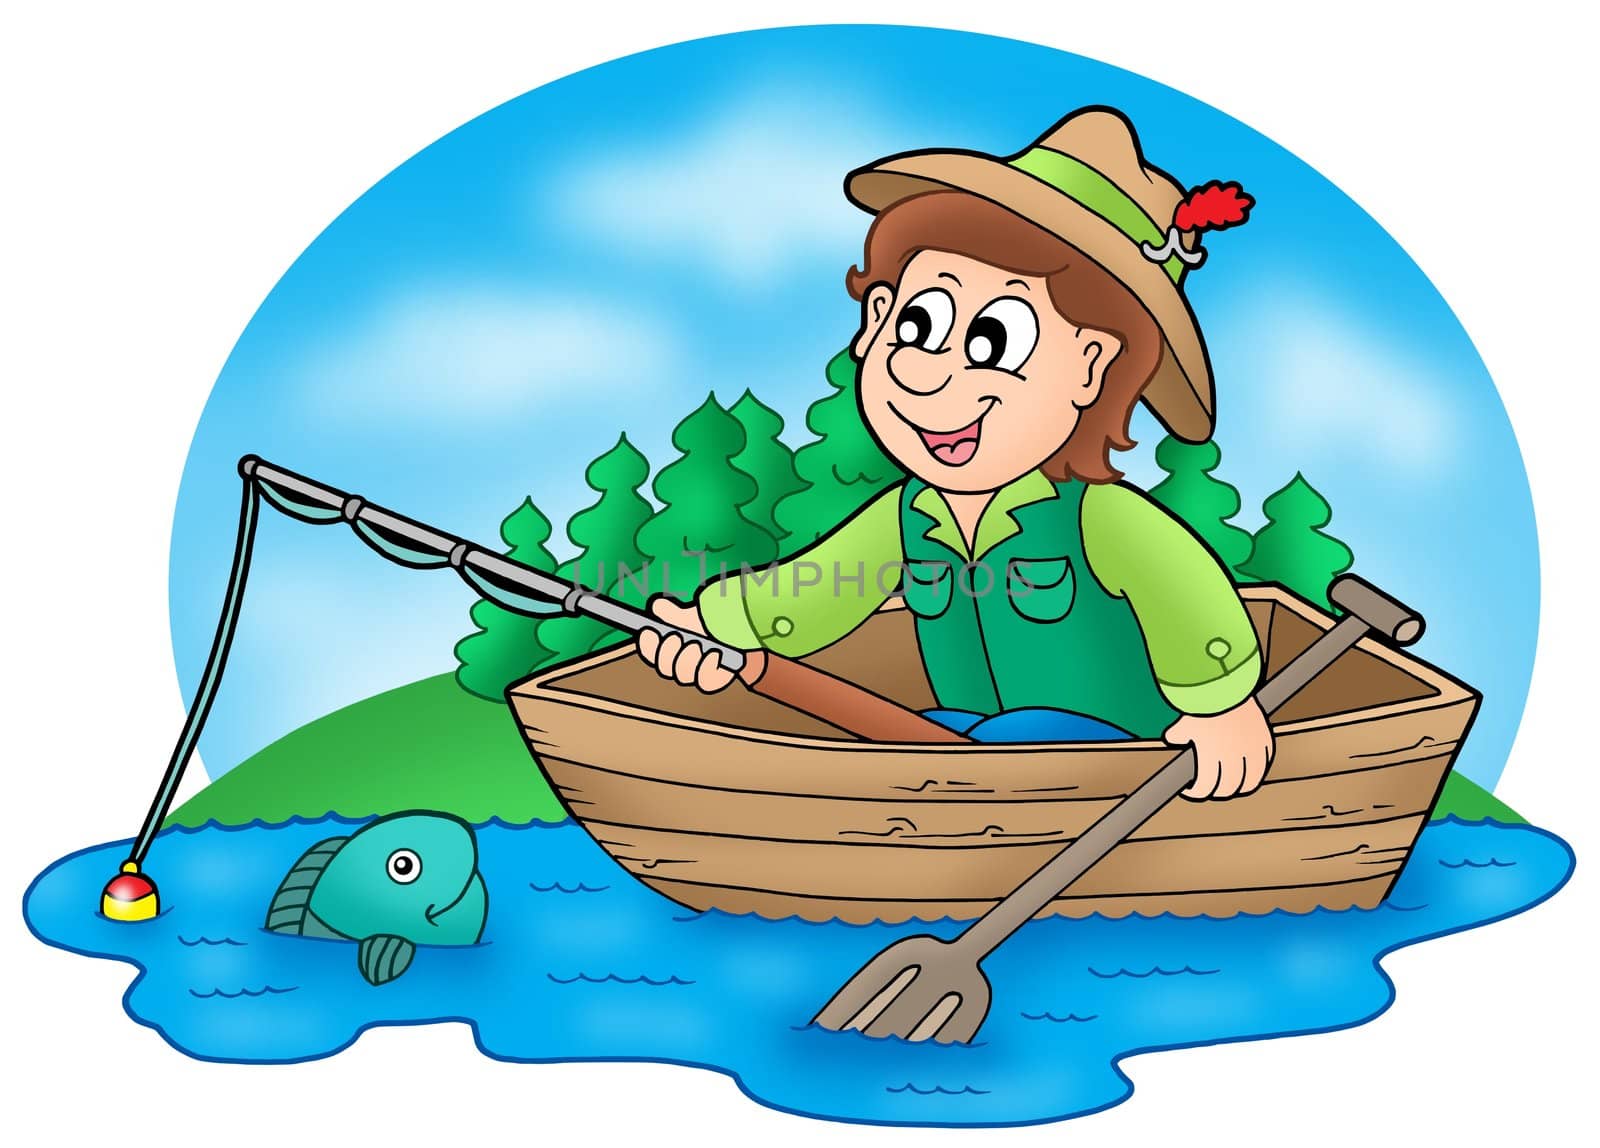 Fisherman in boat with trees - color illustration.